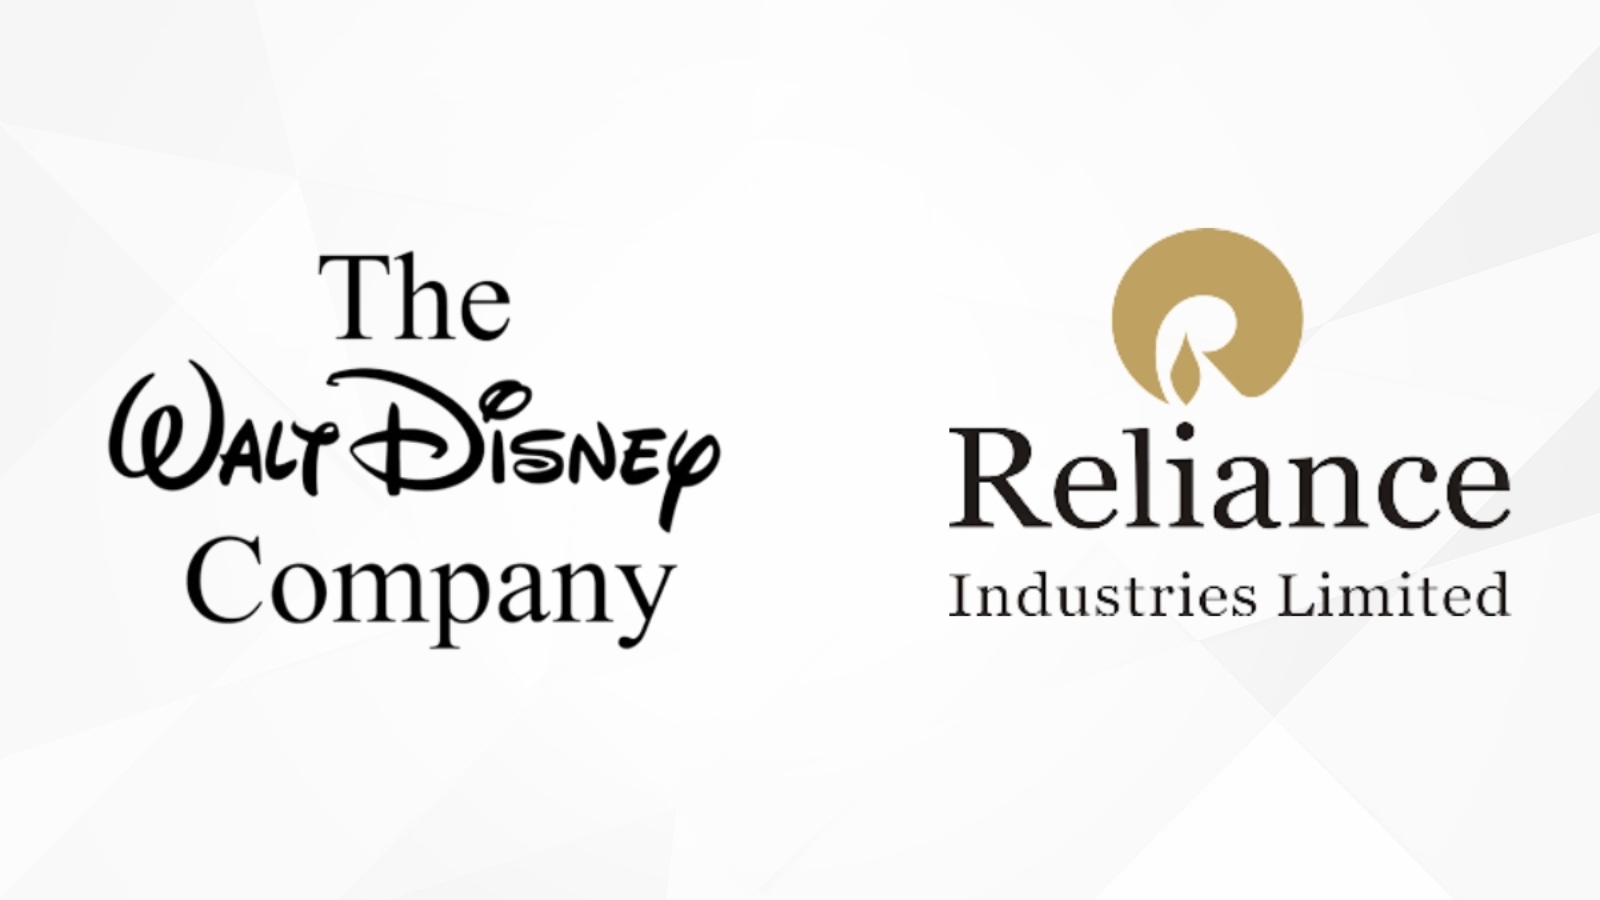 Reliance industries limited, reliance jio, Mukesh ambani’s, $10 billion, Hotstar, walt Disney, Disney india, sell, Disney+ Hotstar, reliance, viacoom18, icc cricket world cup, cricket world cup, media, marketing, ott, over the top apps, streaming platform, merger and acquisition, M&A, jio cinema, Hotstar, cash and stock deal, partnership, India, Sun TV, Adani, Blackstone, private equity, piecemeal transaction, assets, Disney star, global streaming, ad revenue, joint venture, IPL, on-demand video, ODV, video streaming, warner bros discovery, HBO, programming, paramount global,